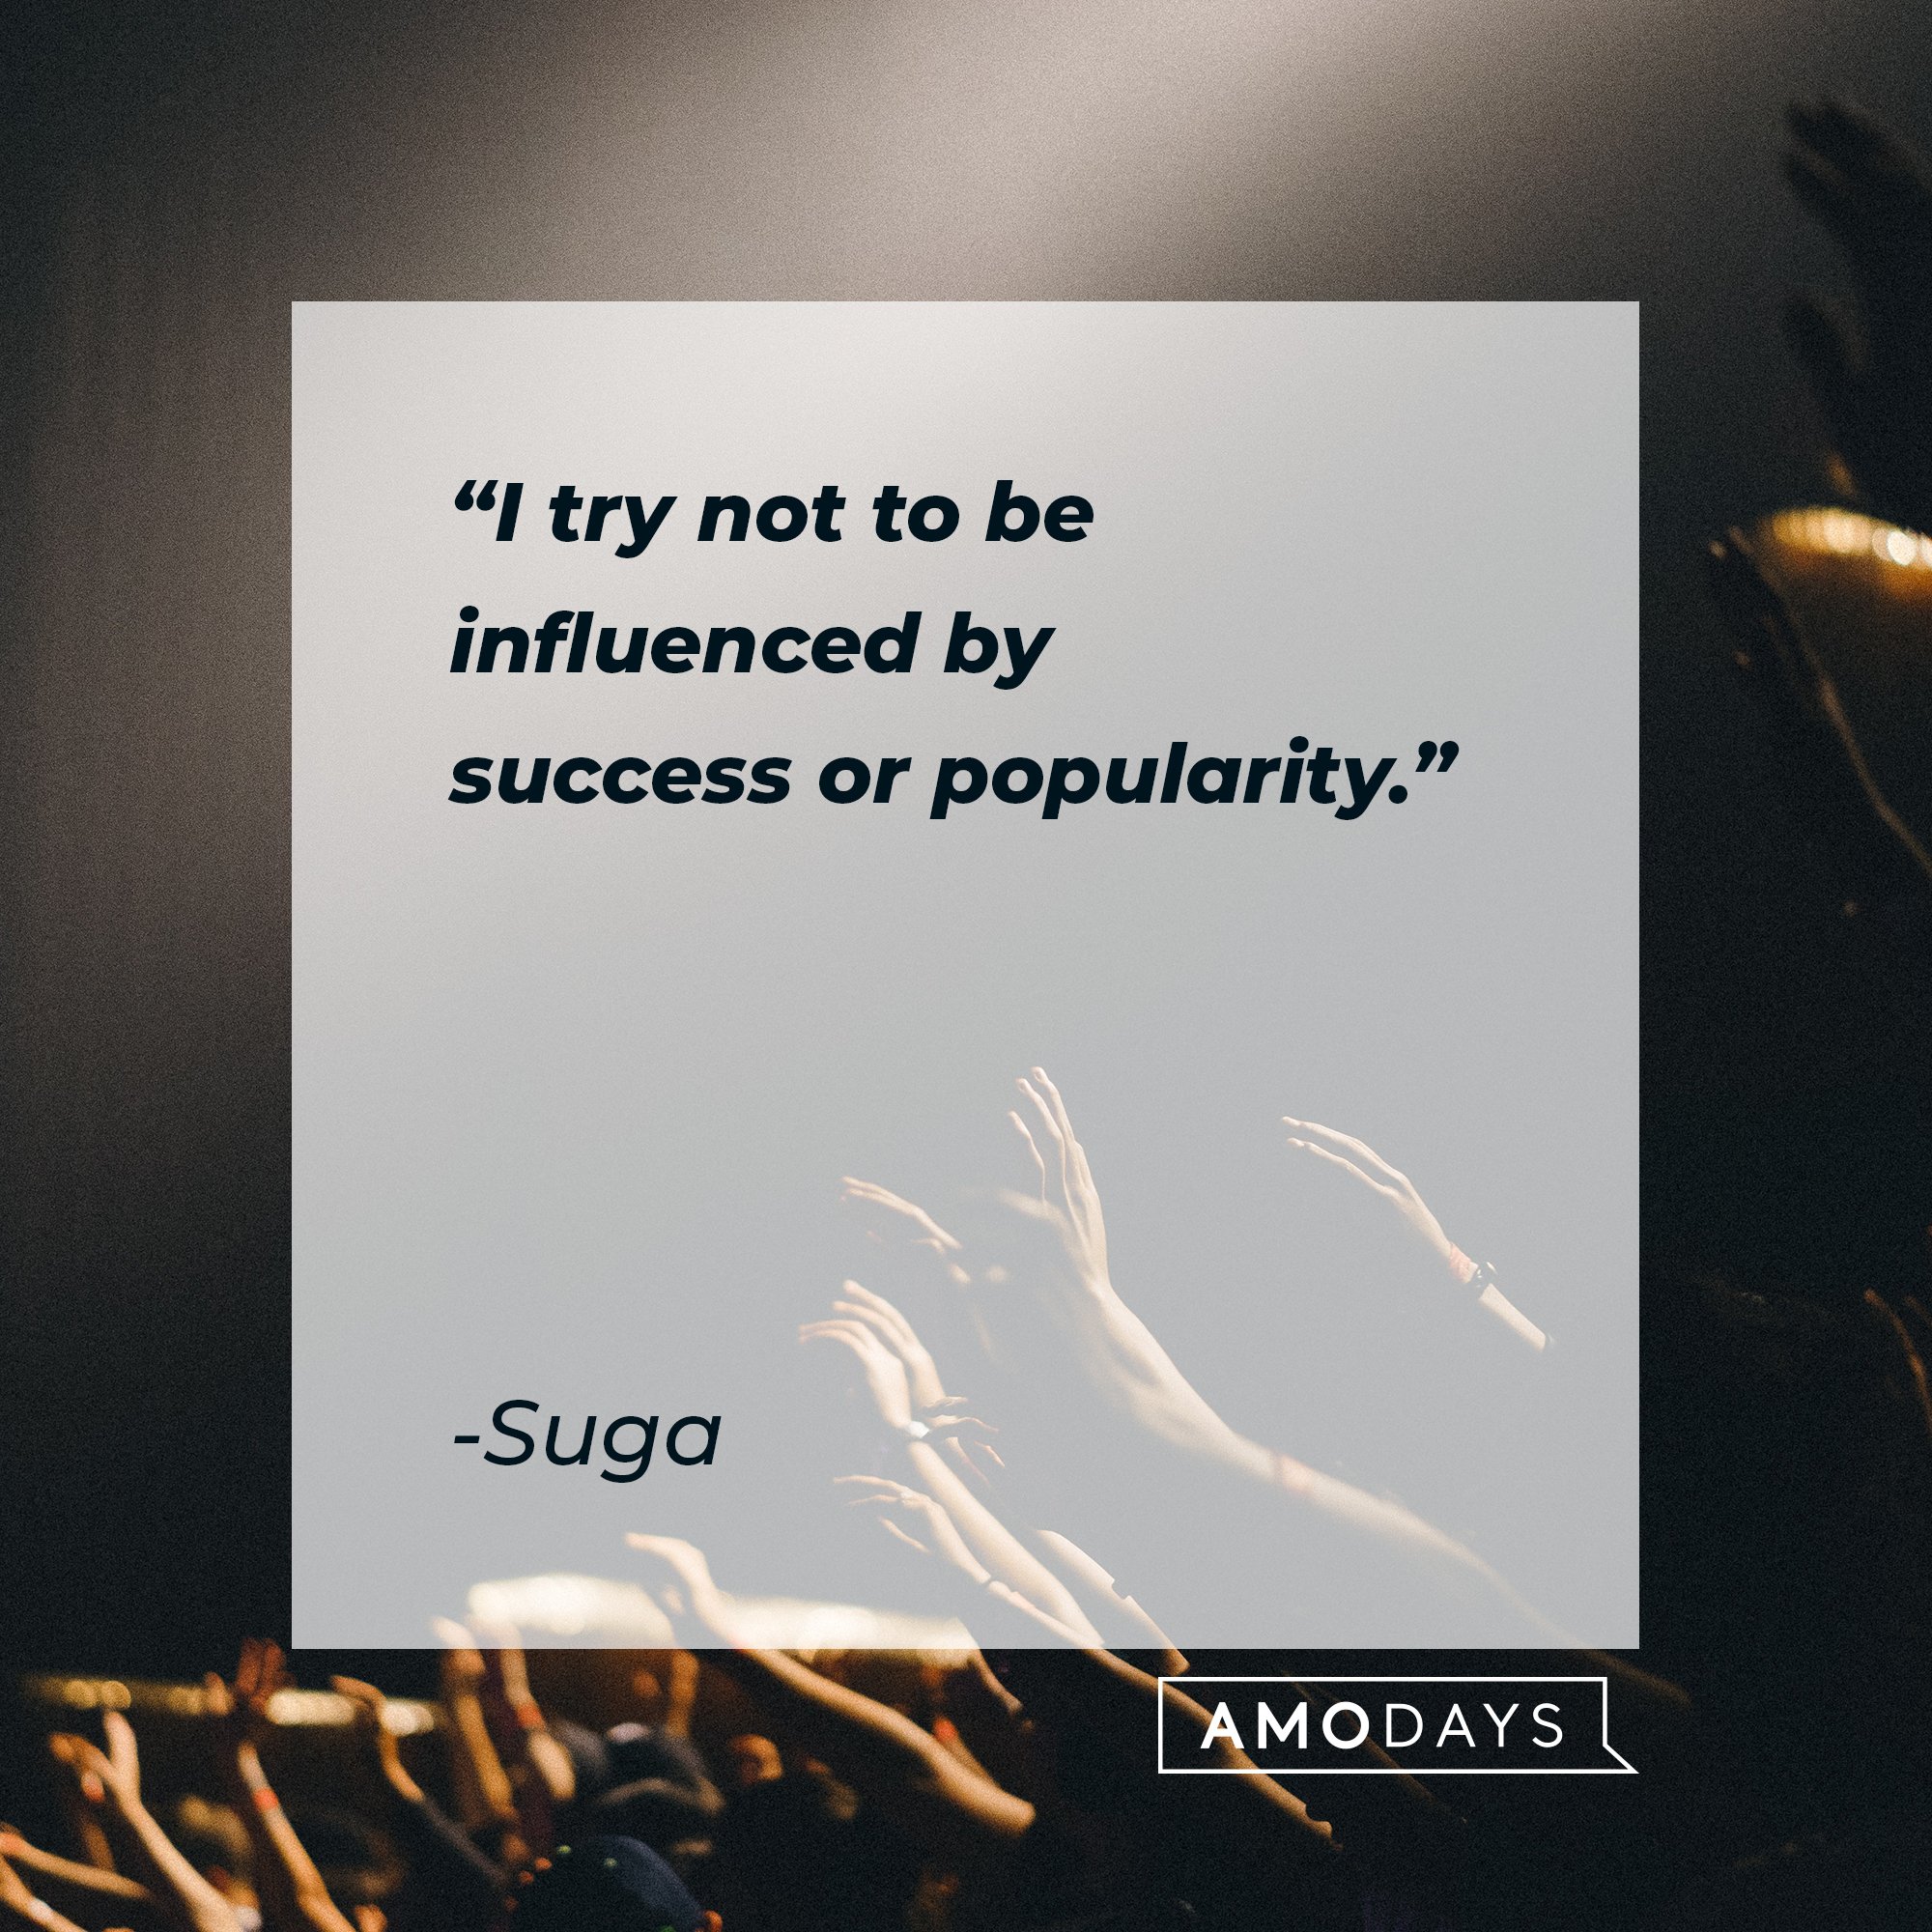 Suga’s quote: "I try not to be influenced by success or popularity." | Images: AmoDays